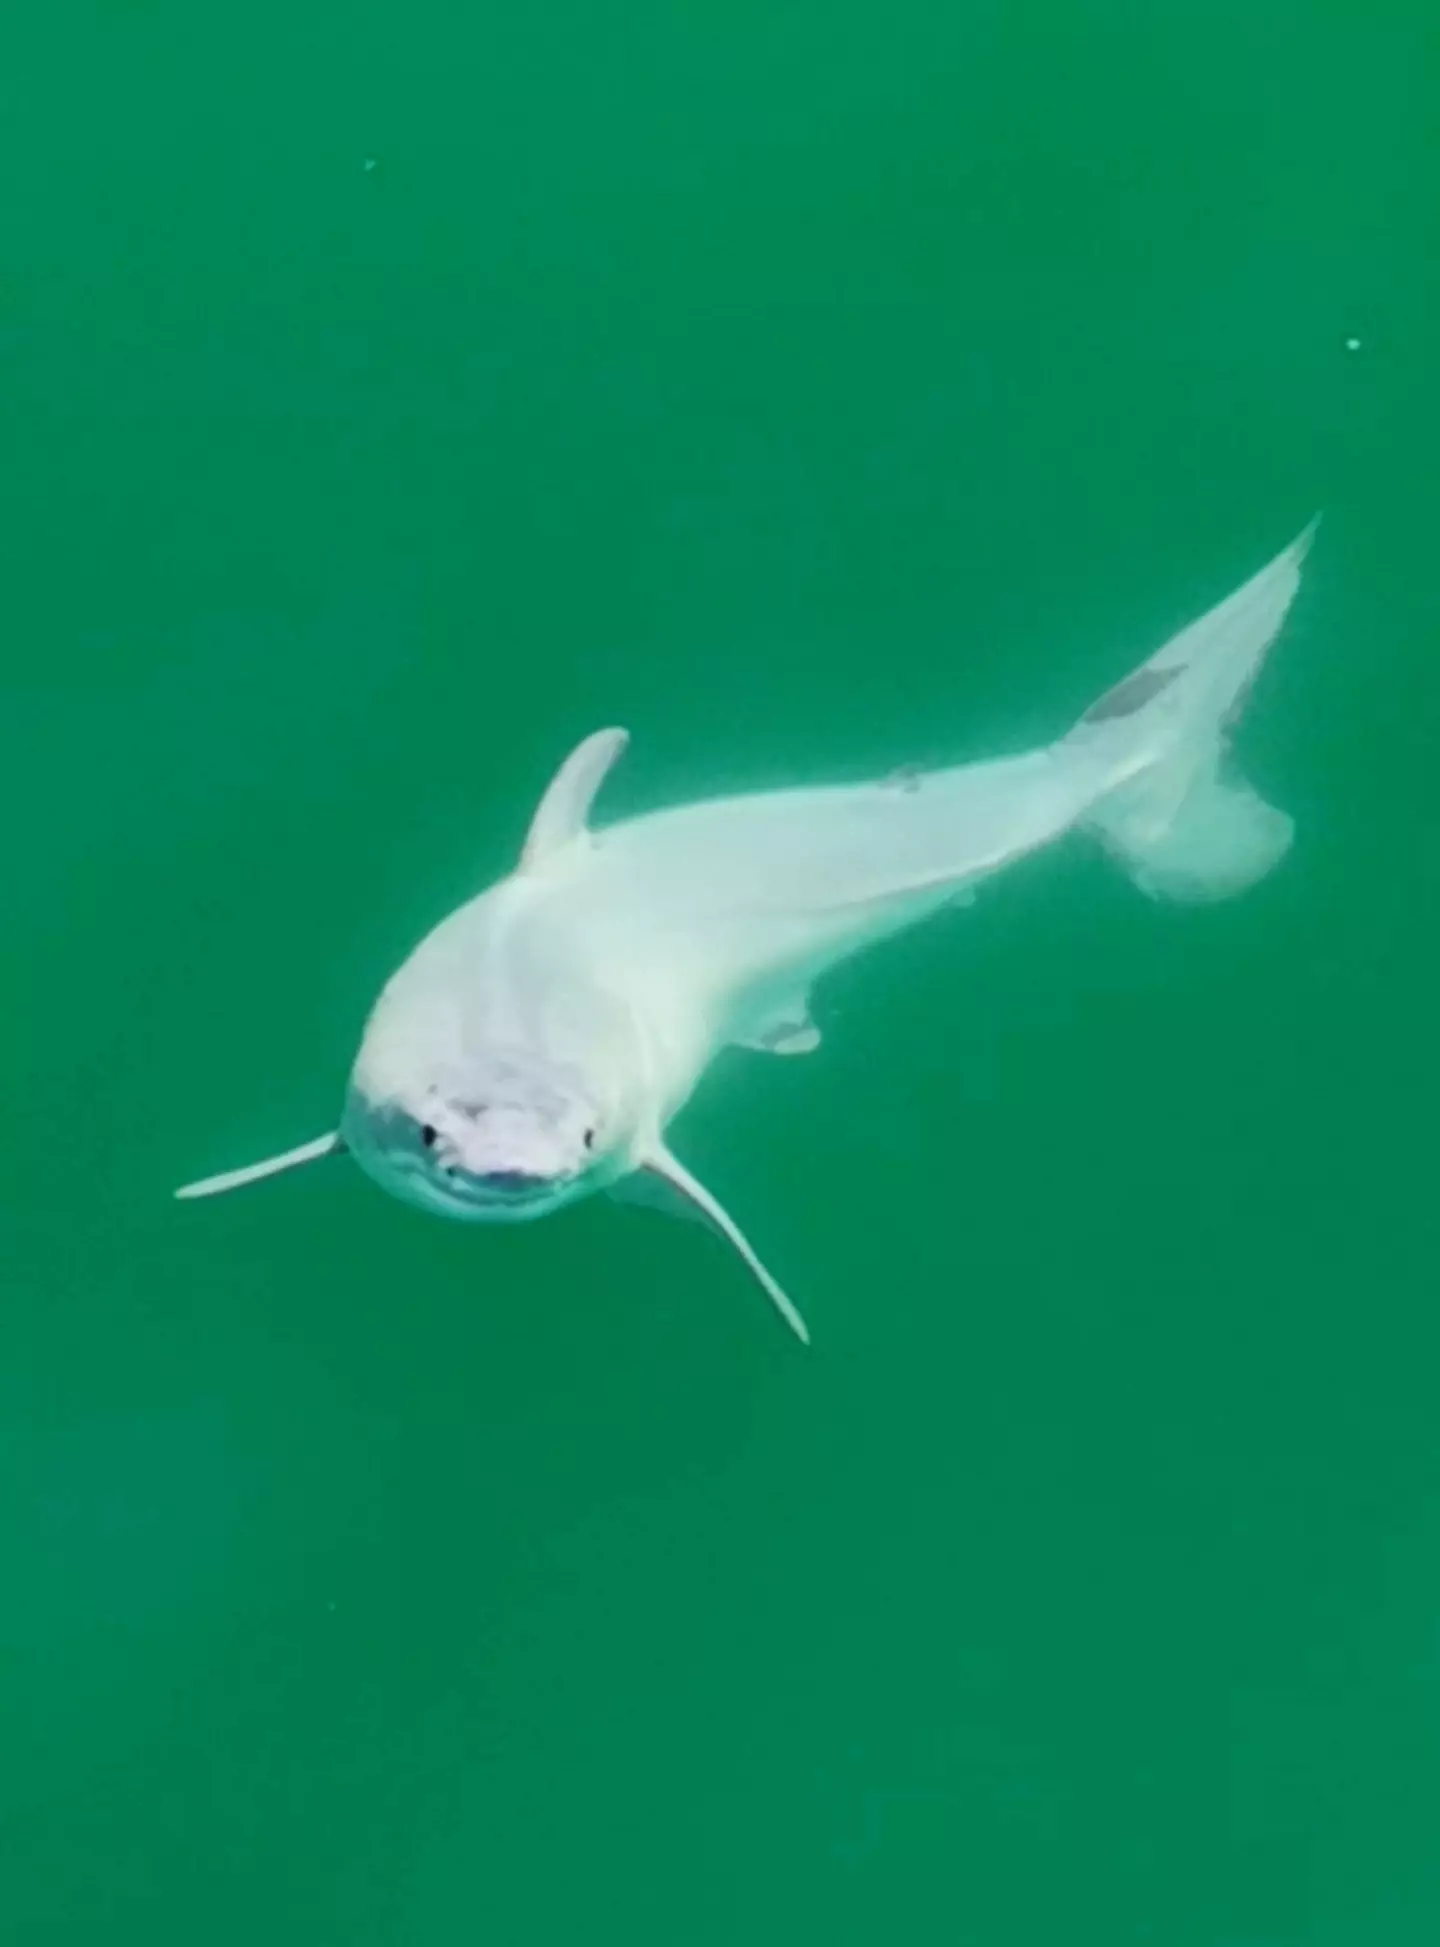 A newborn great white shark has been captured in remarkable footage.